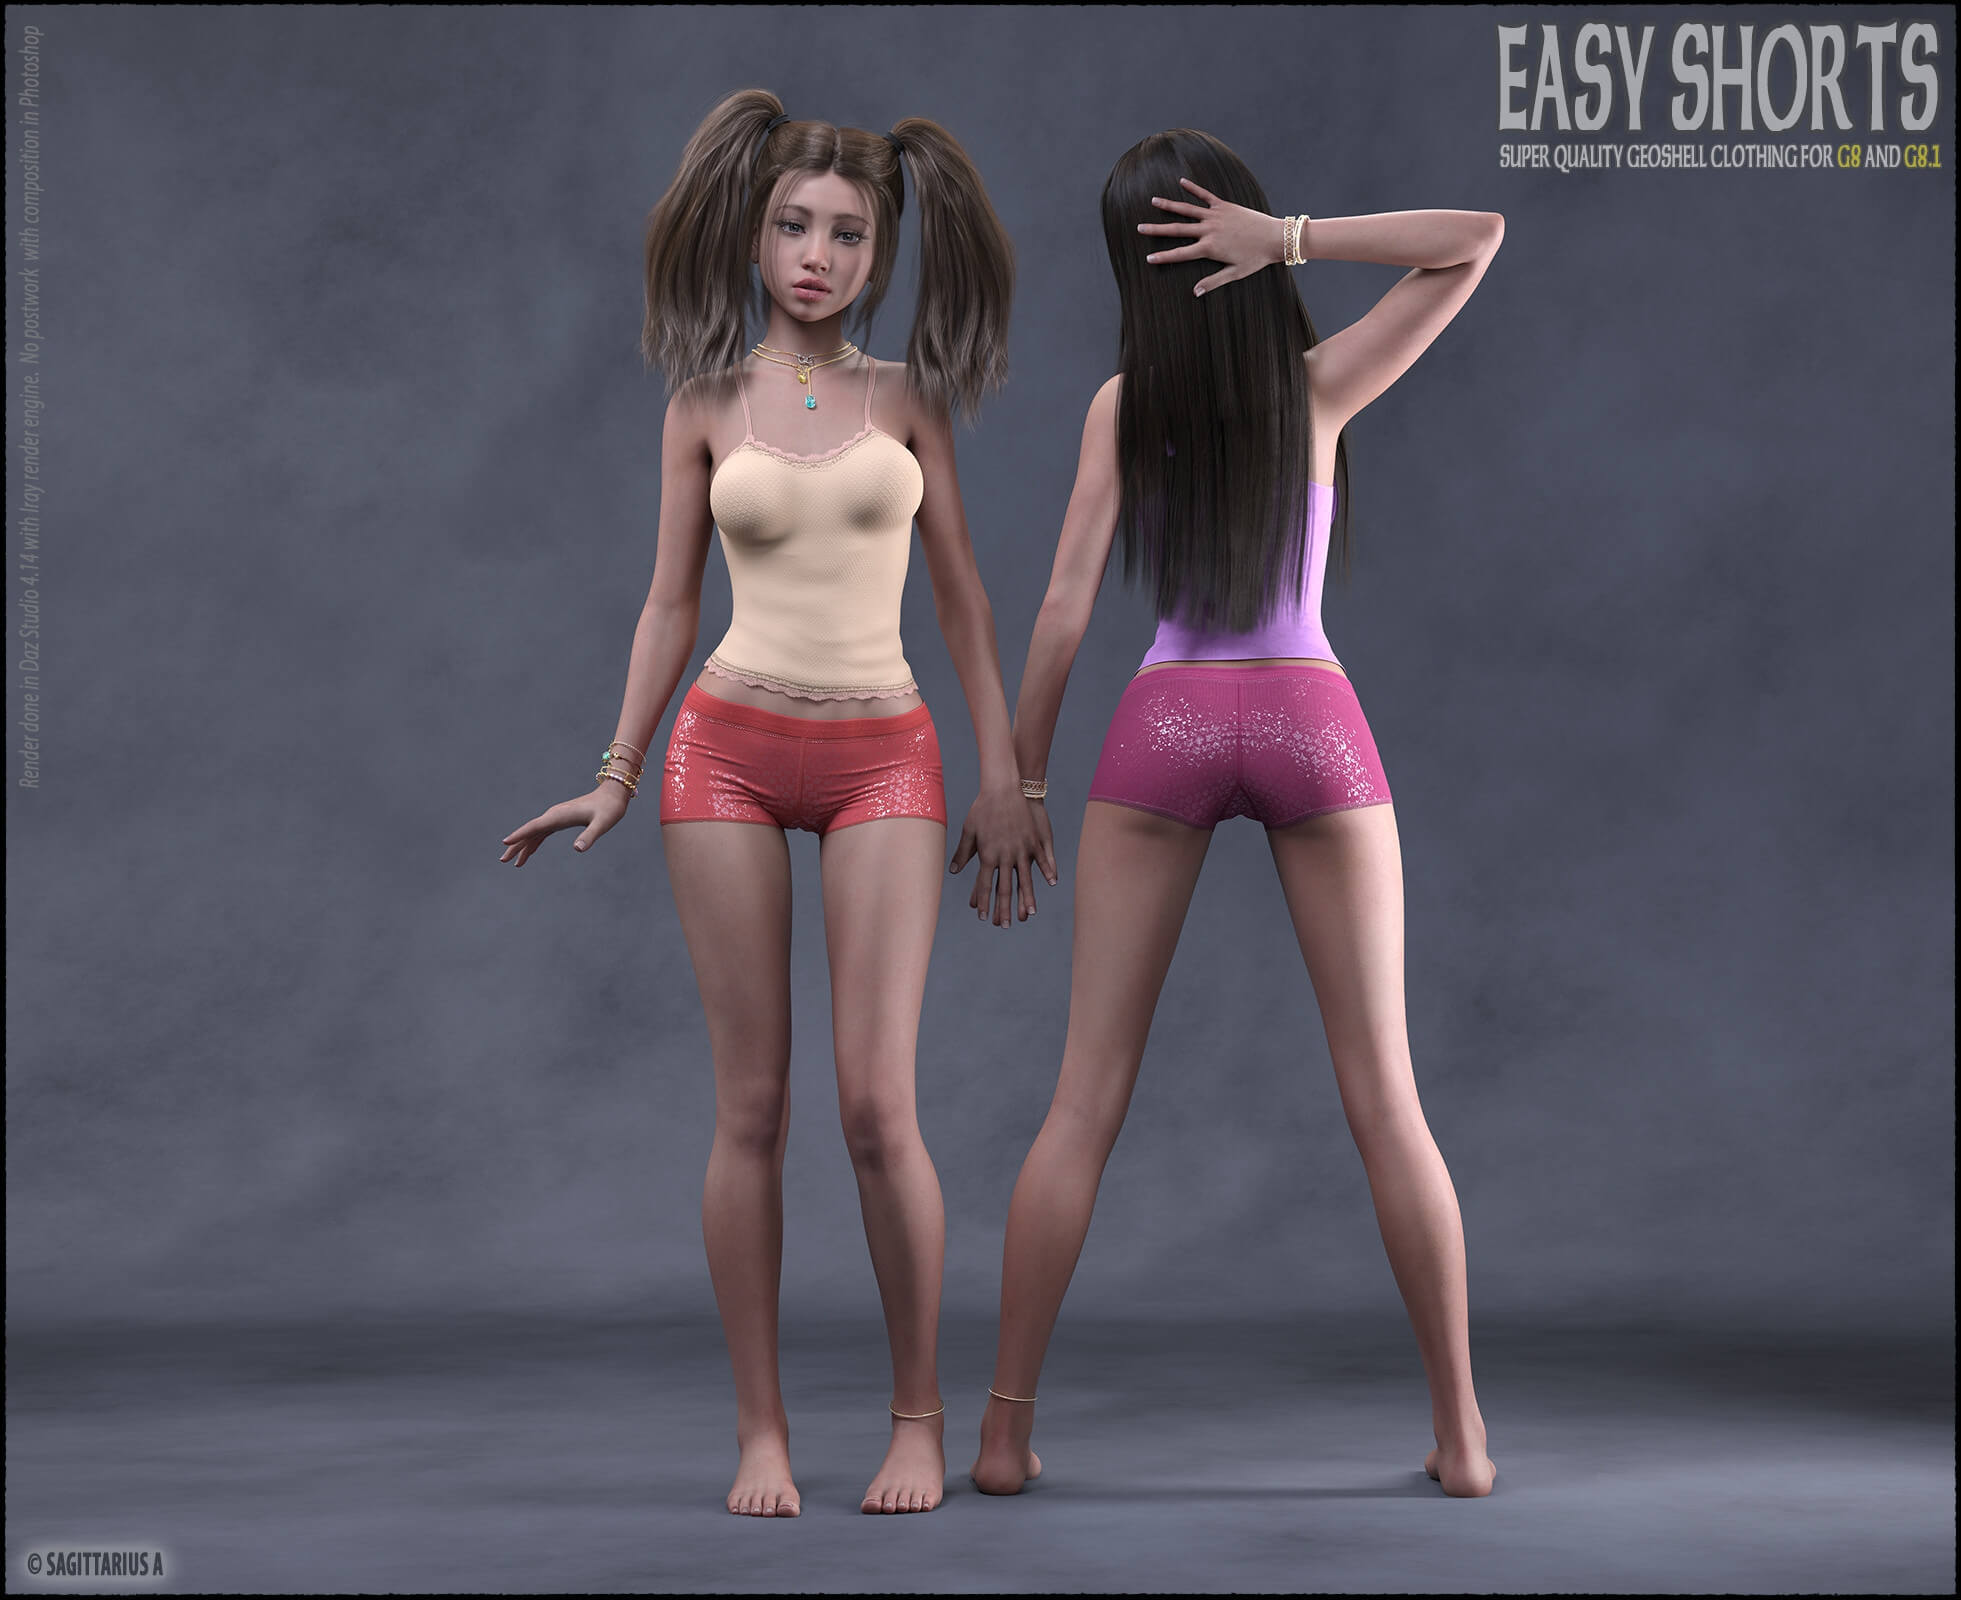 easy shorts for genesis 8 1 and genesis 8 01334d5f683c36f19a